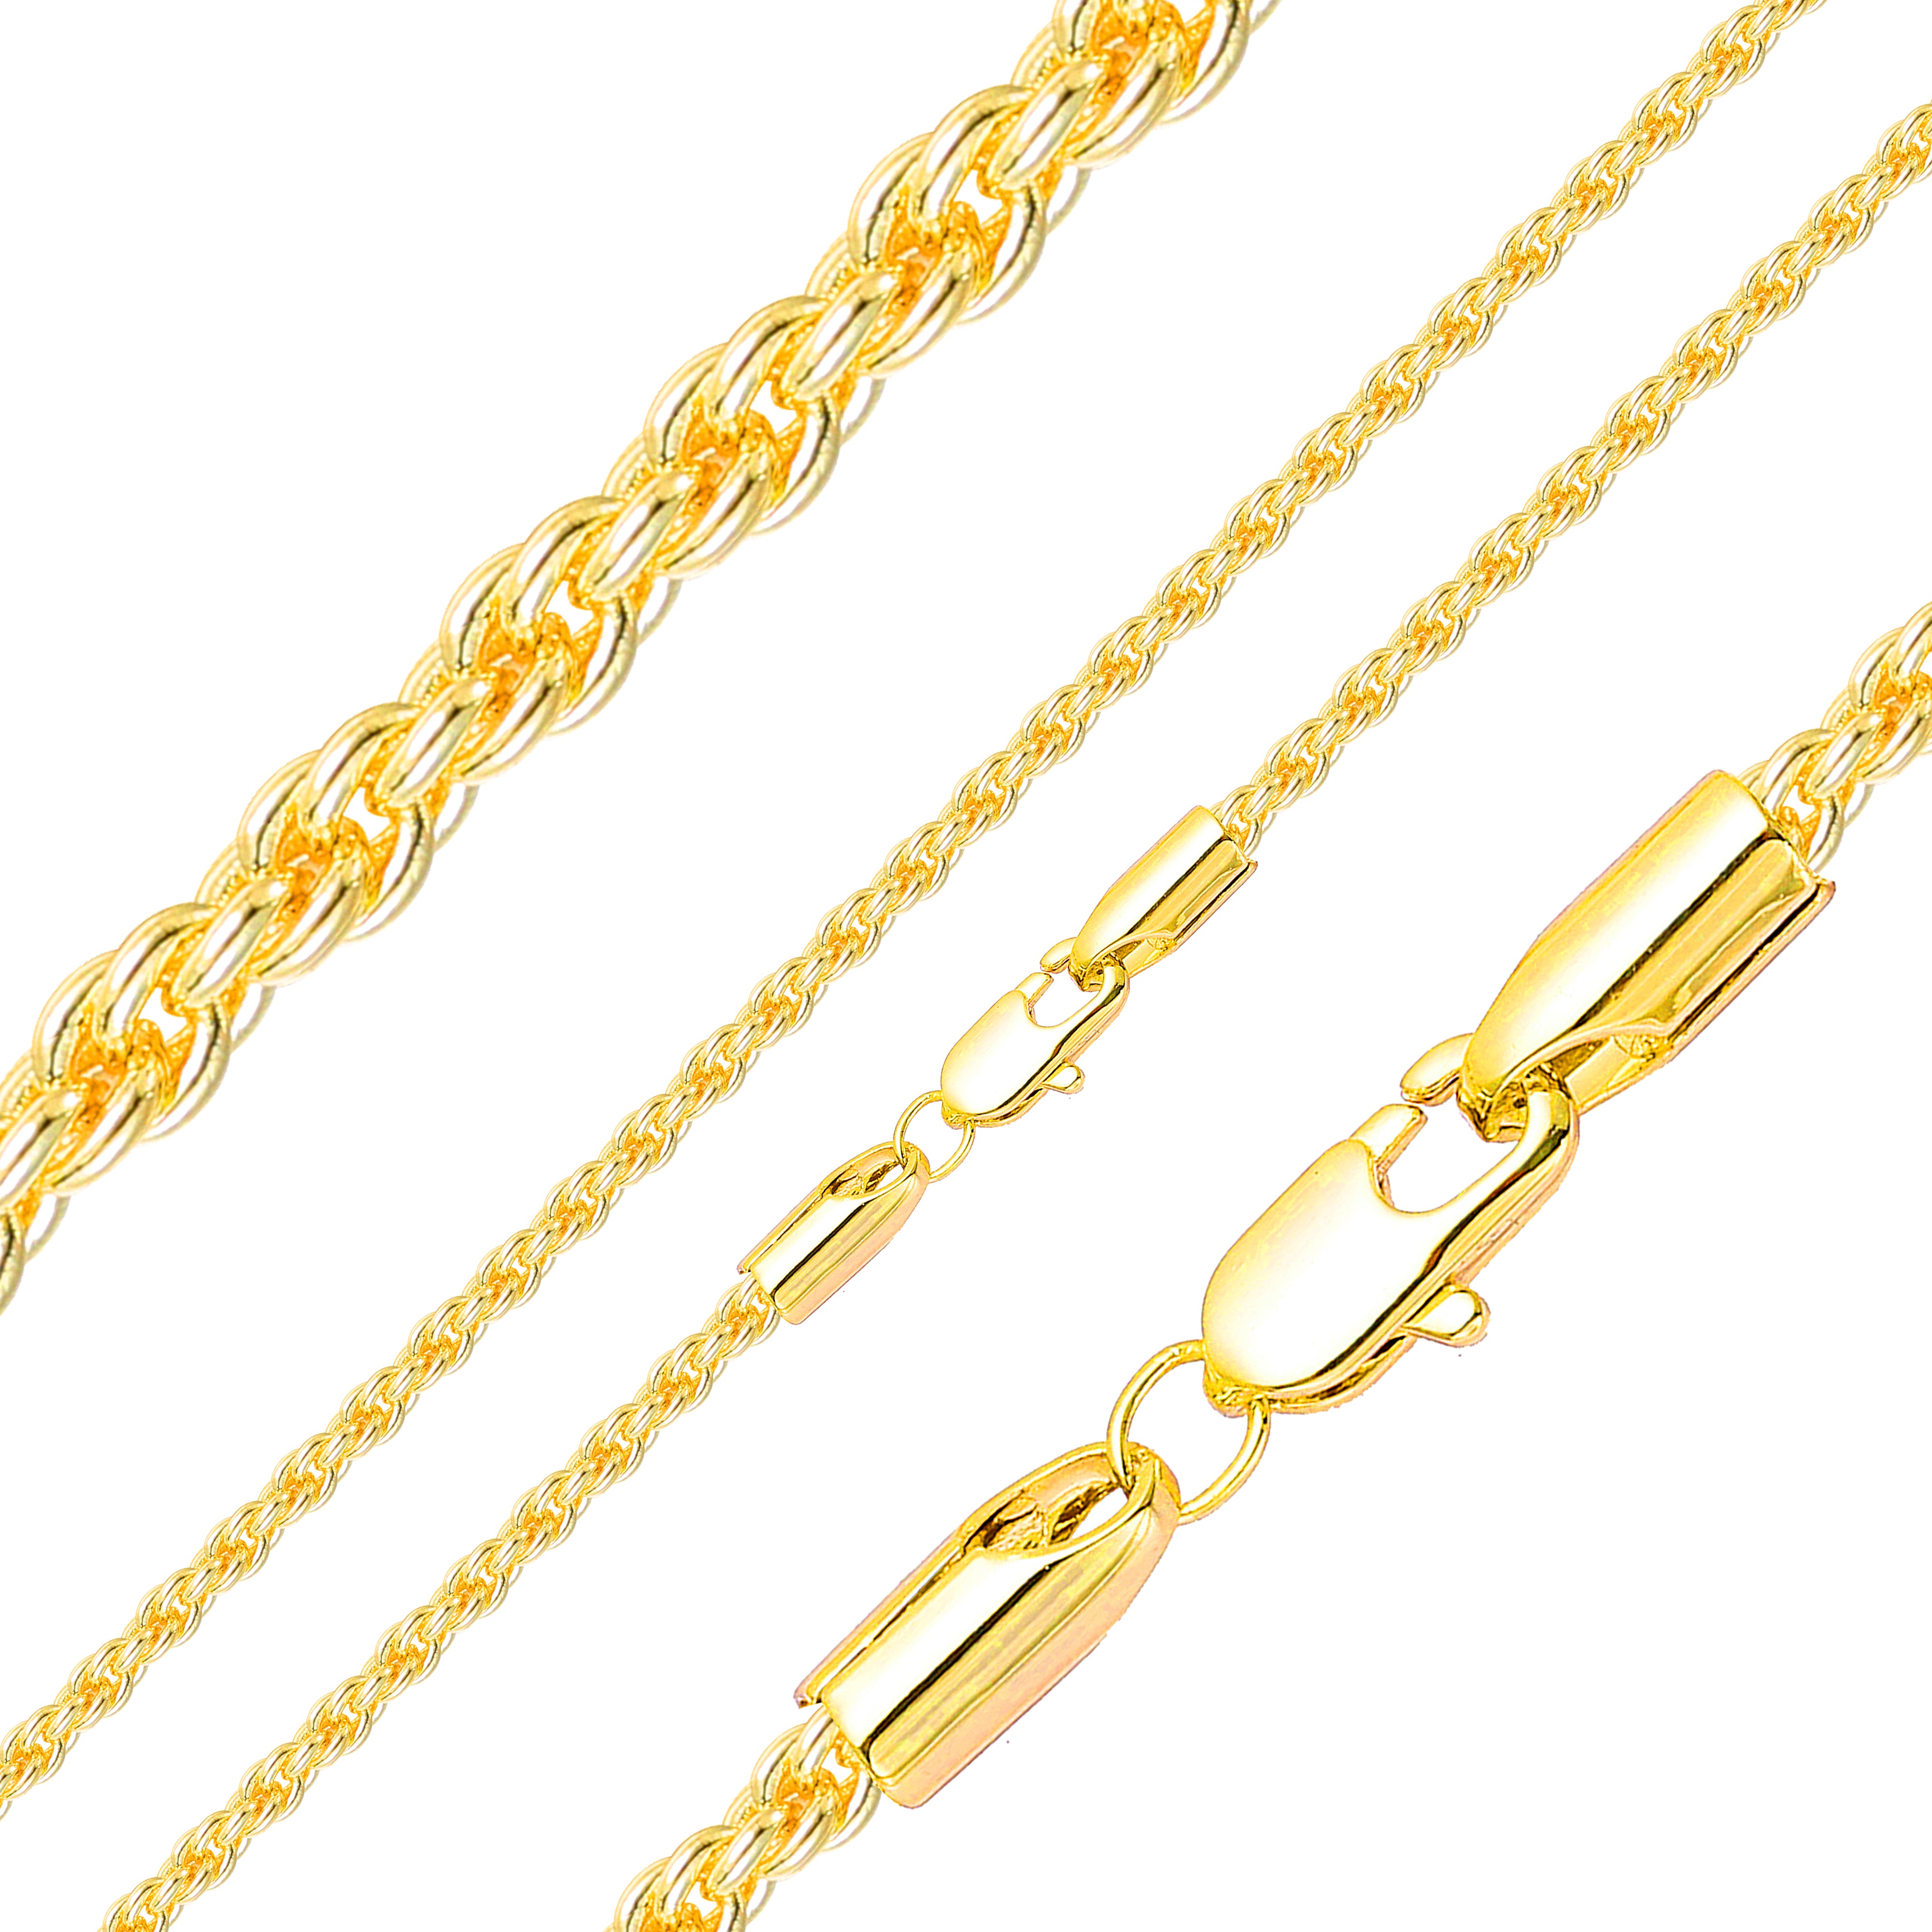 Classic 14K Gold French Rope chains [Thin 2mm-4mm]